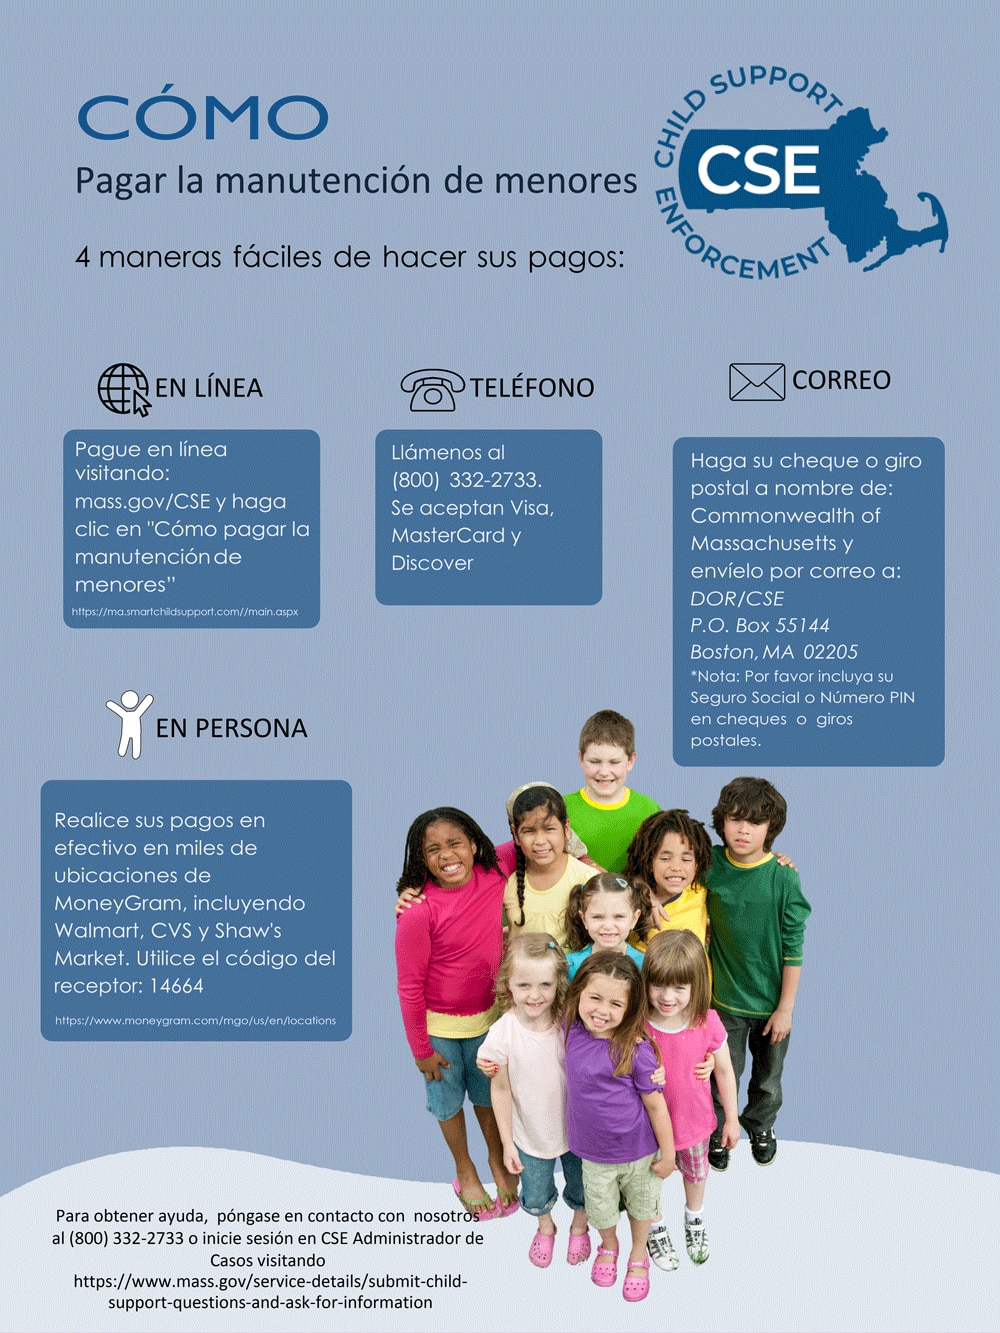 Four methods for paying child support (Spanish version)